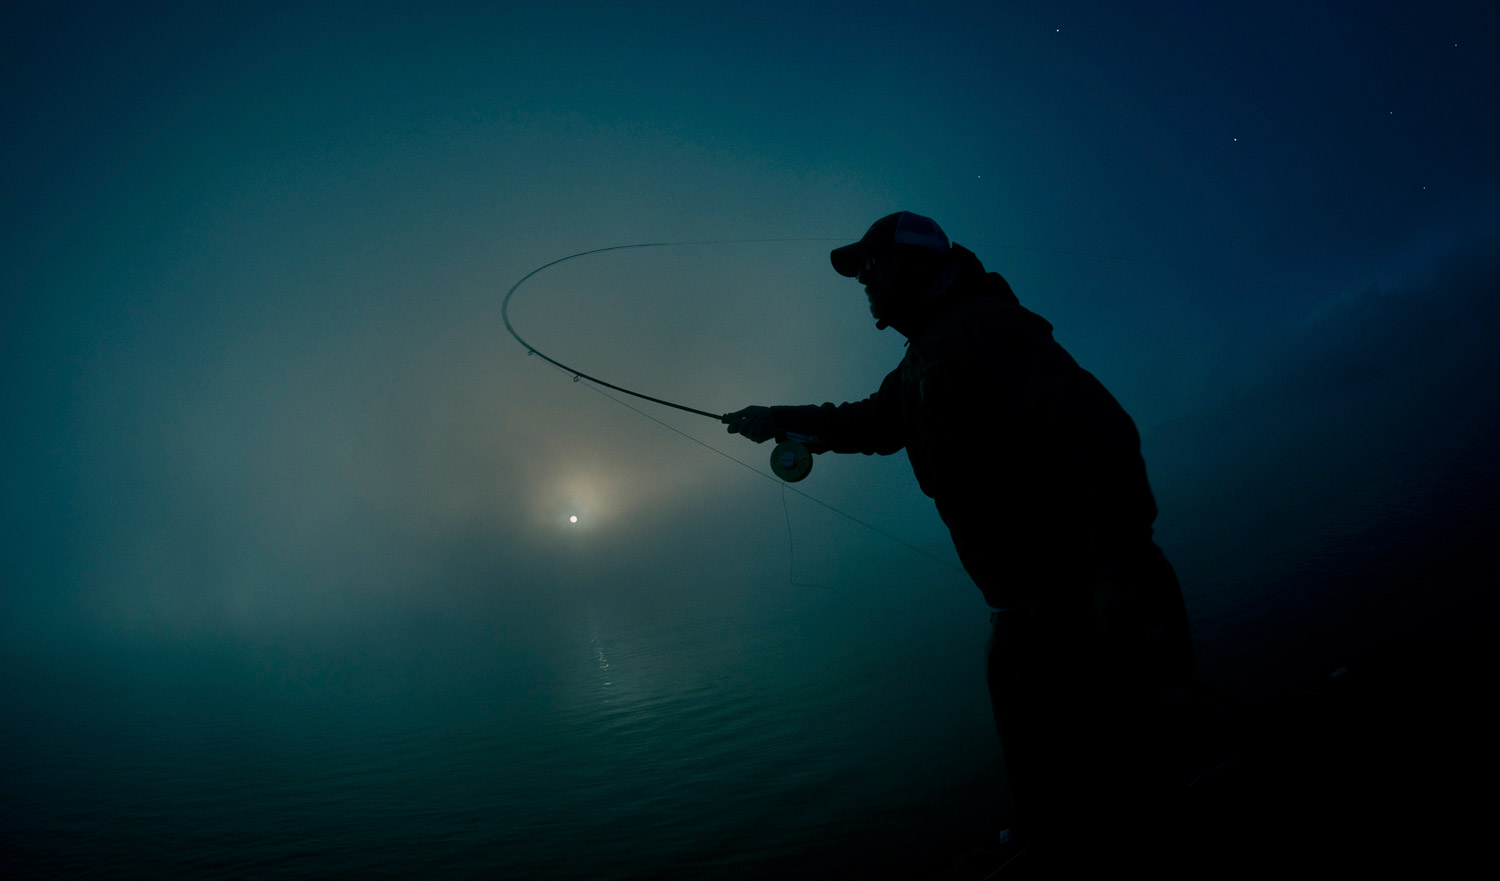 In The Dark of Night - Fly Fishing, Gink and Gasoline